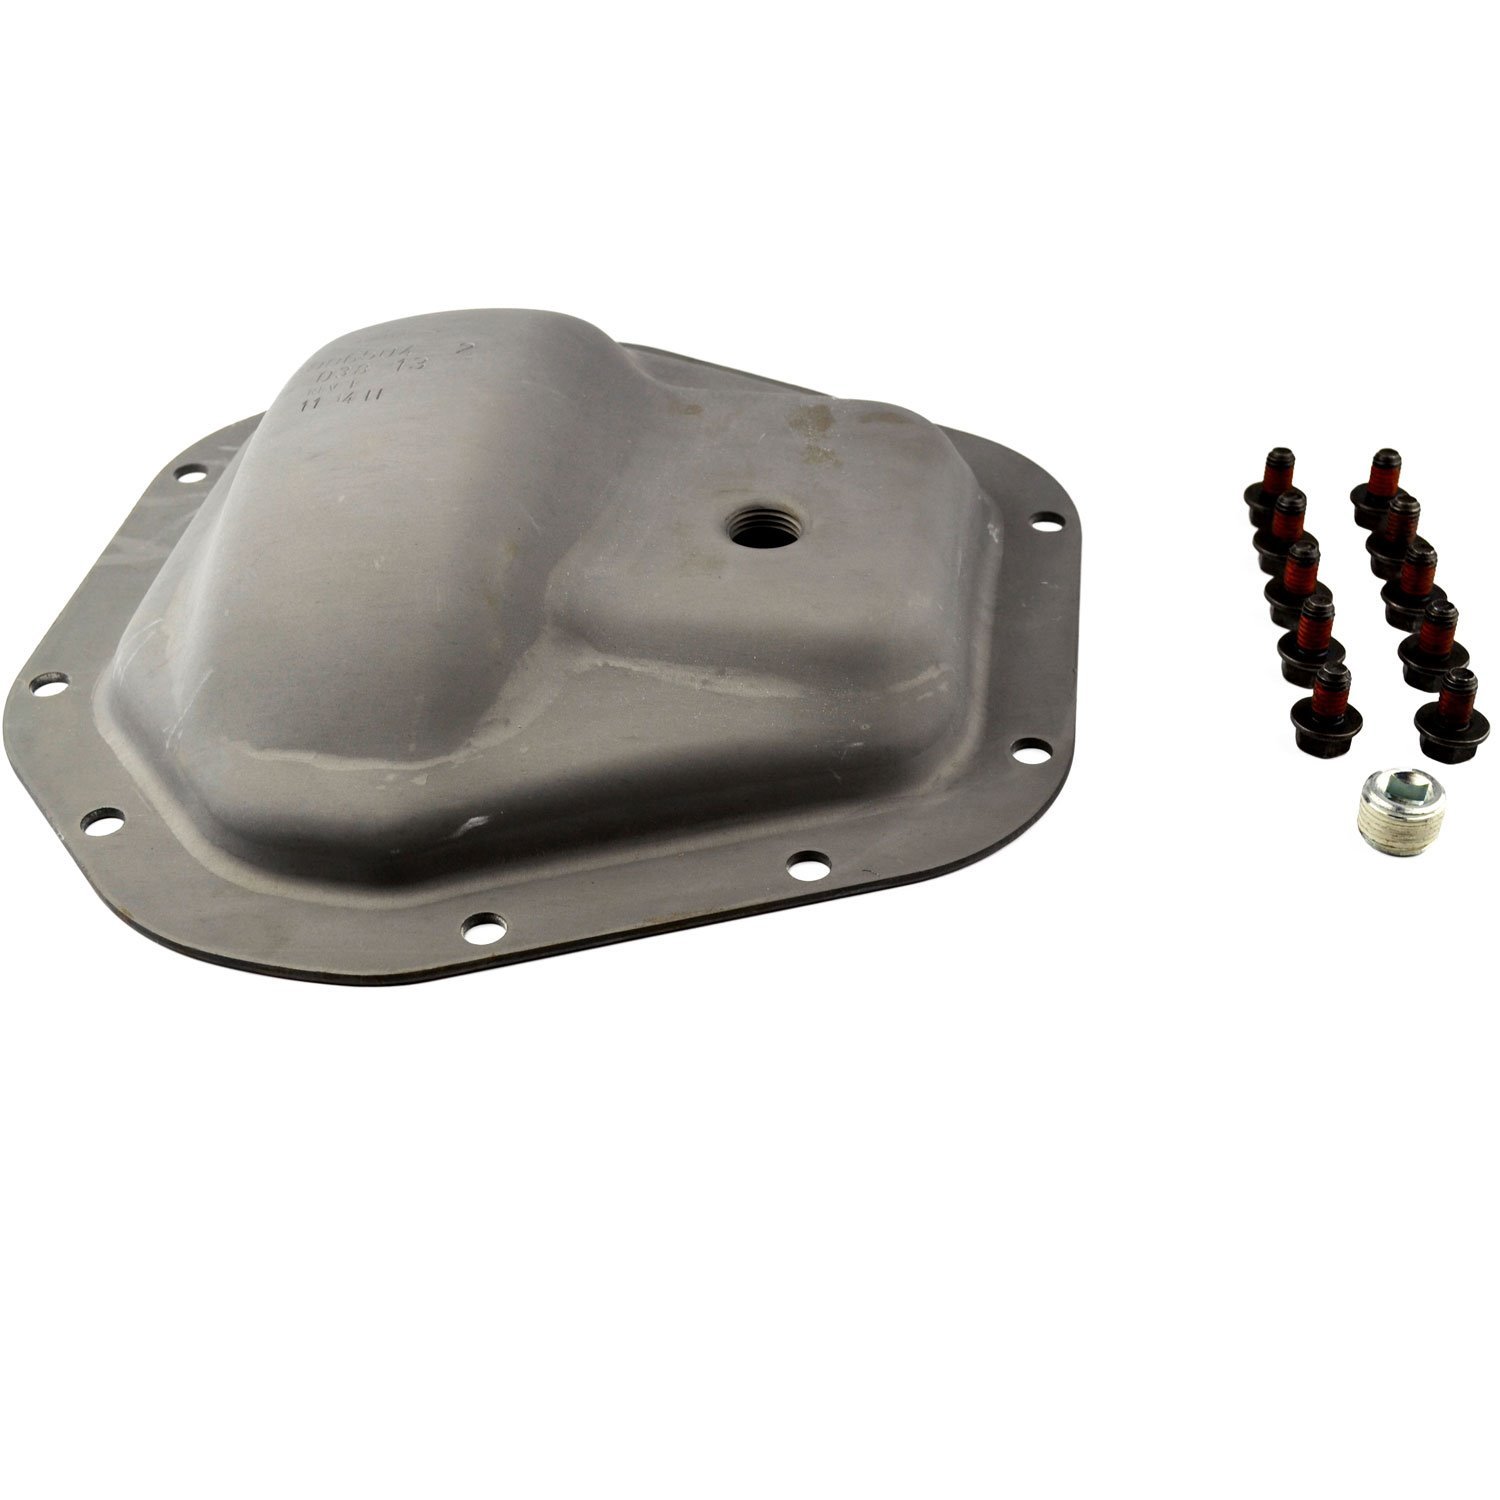 Stamped Steel Differential Cover Fits: 1997-2001 Ford E Series